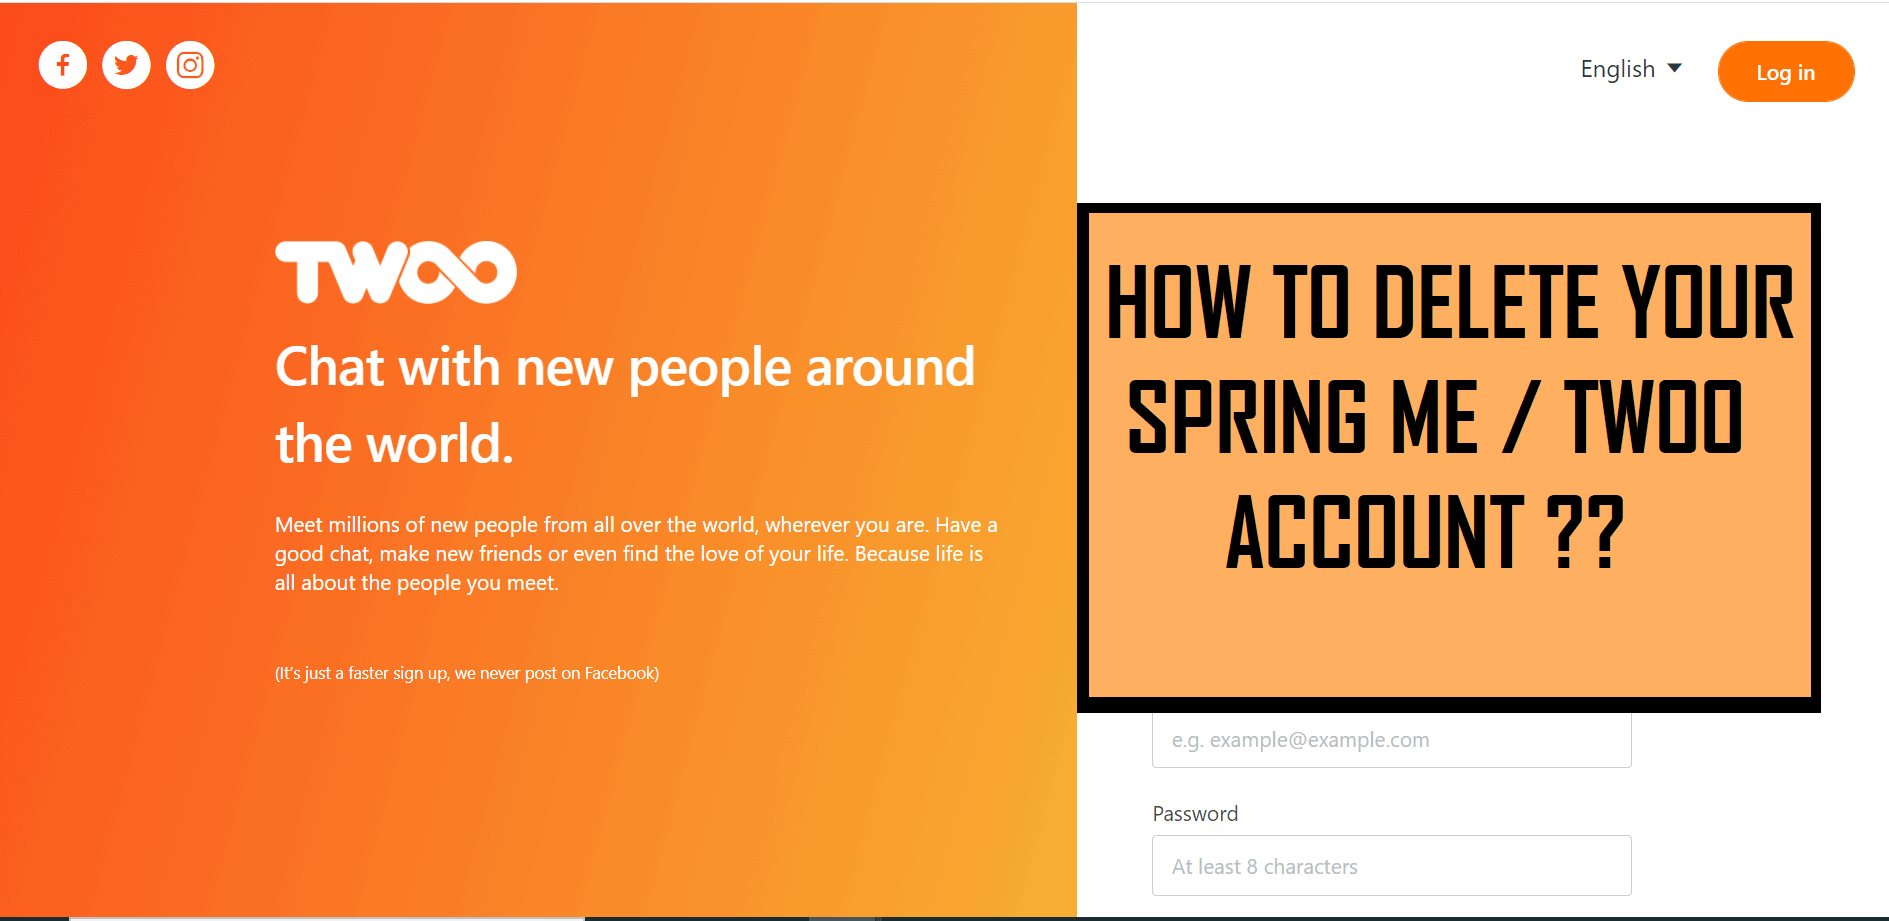 How to delete your Spring Me account